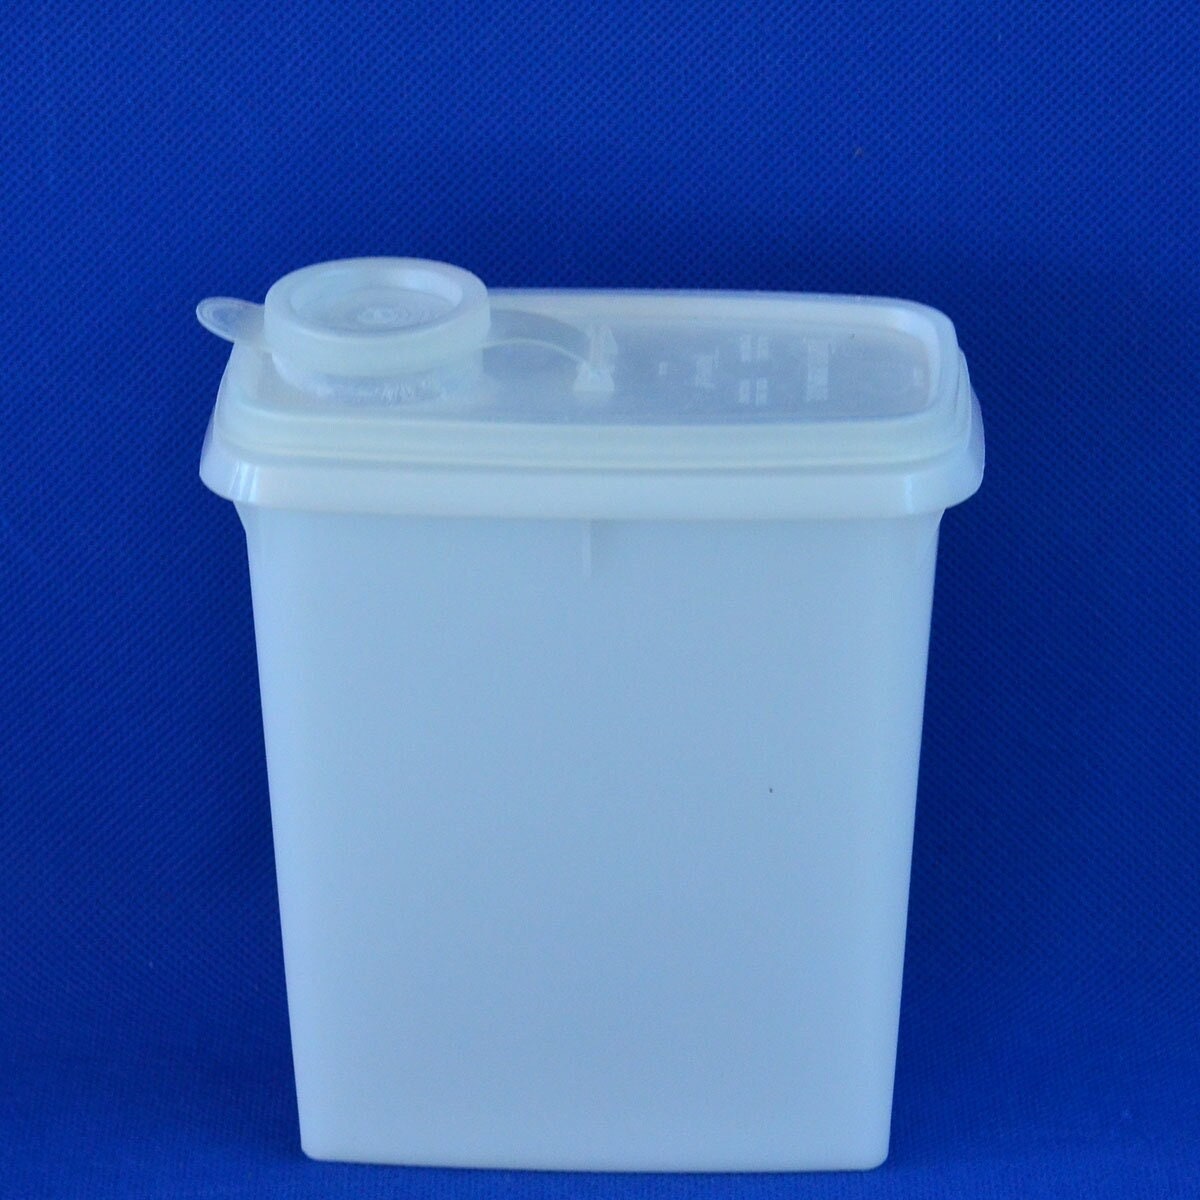 Tupperware 499-3 Narrow Small Cereal Containter, Lid 509-11 